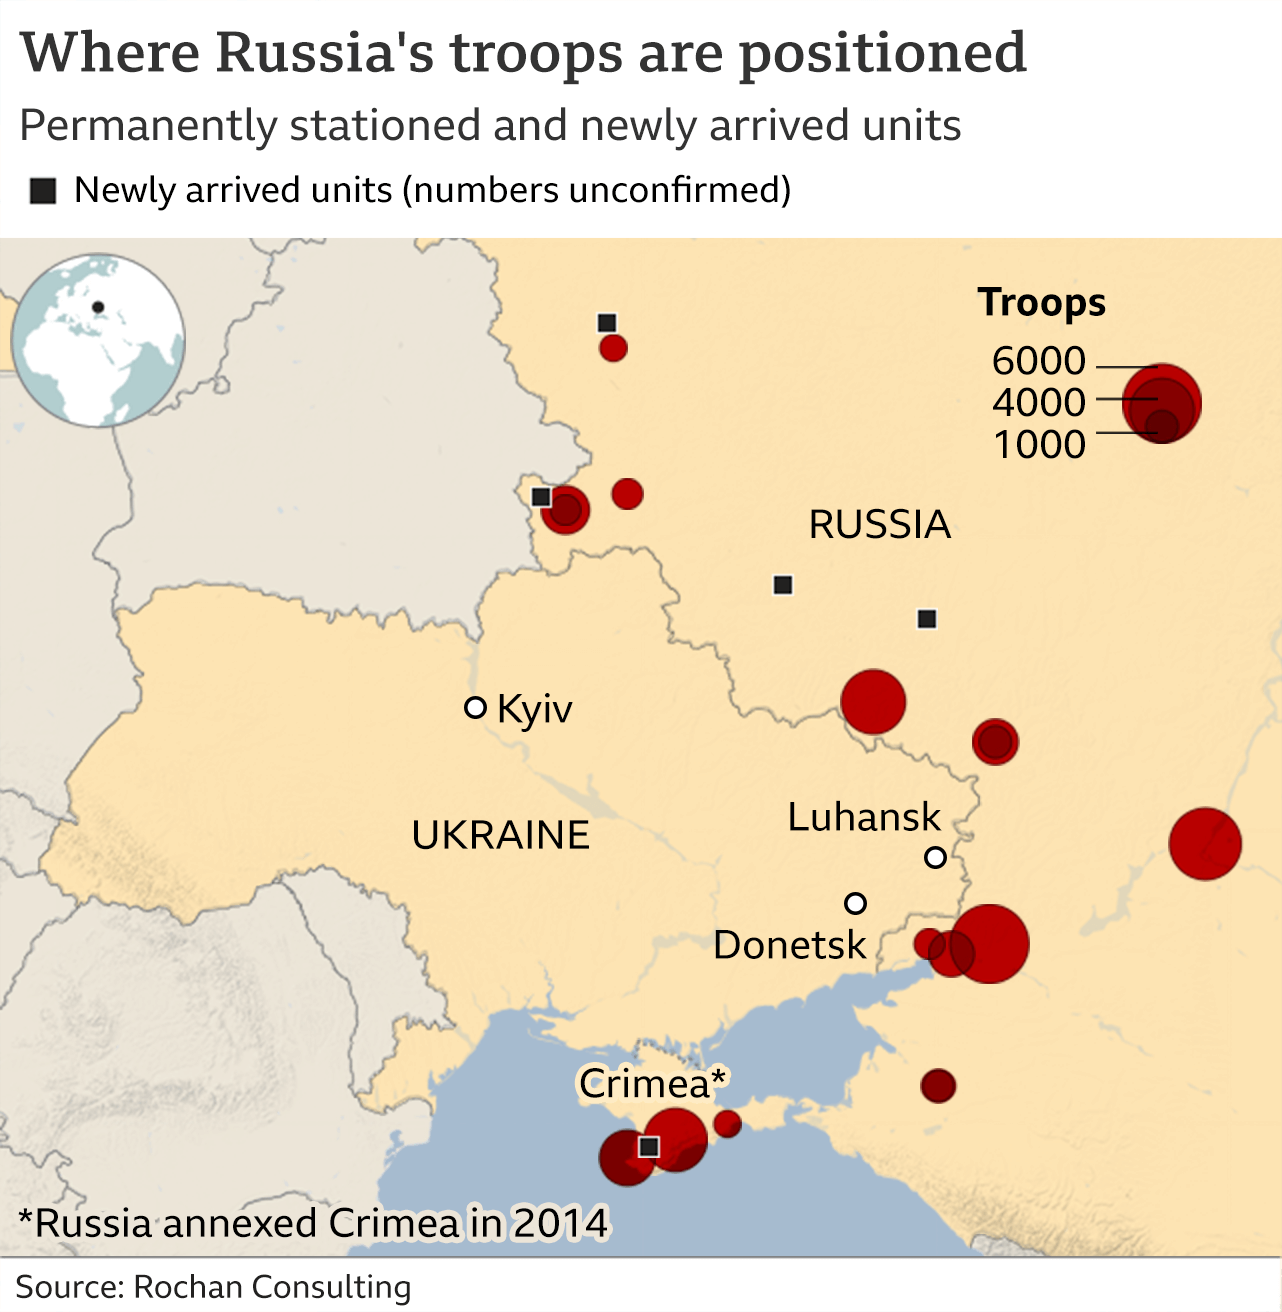 Map showing where Russia's troops are positioned along the border with Ukraine.